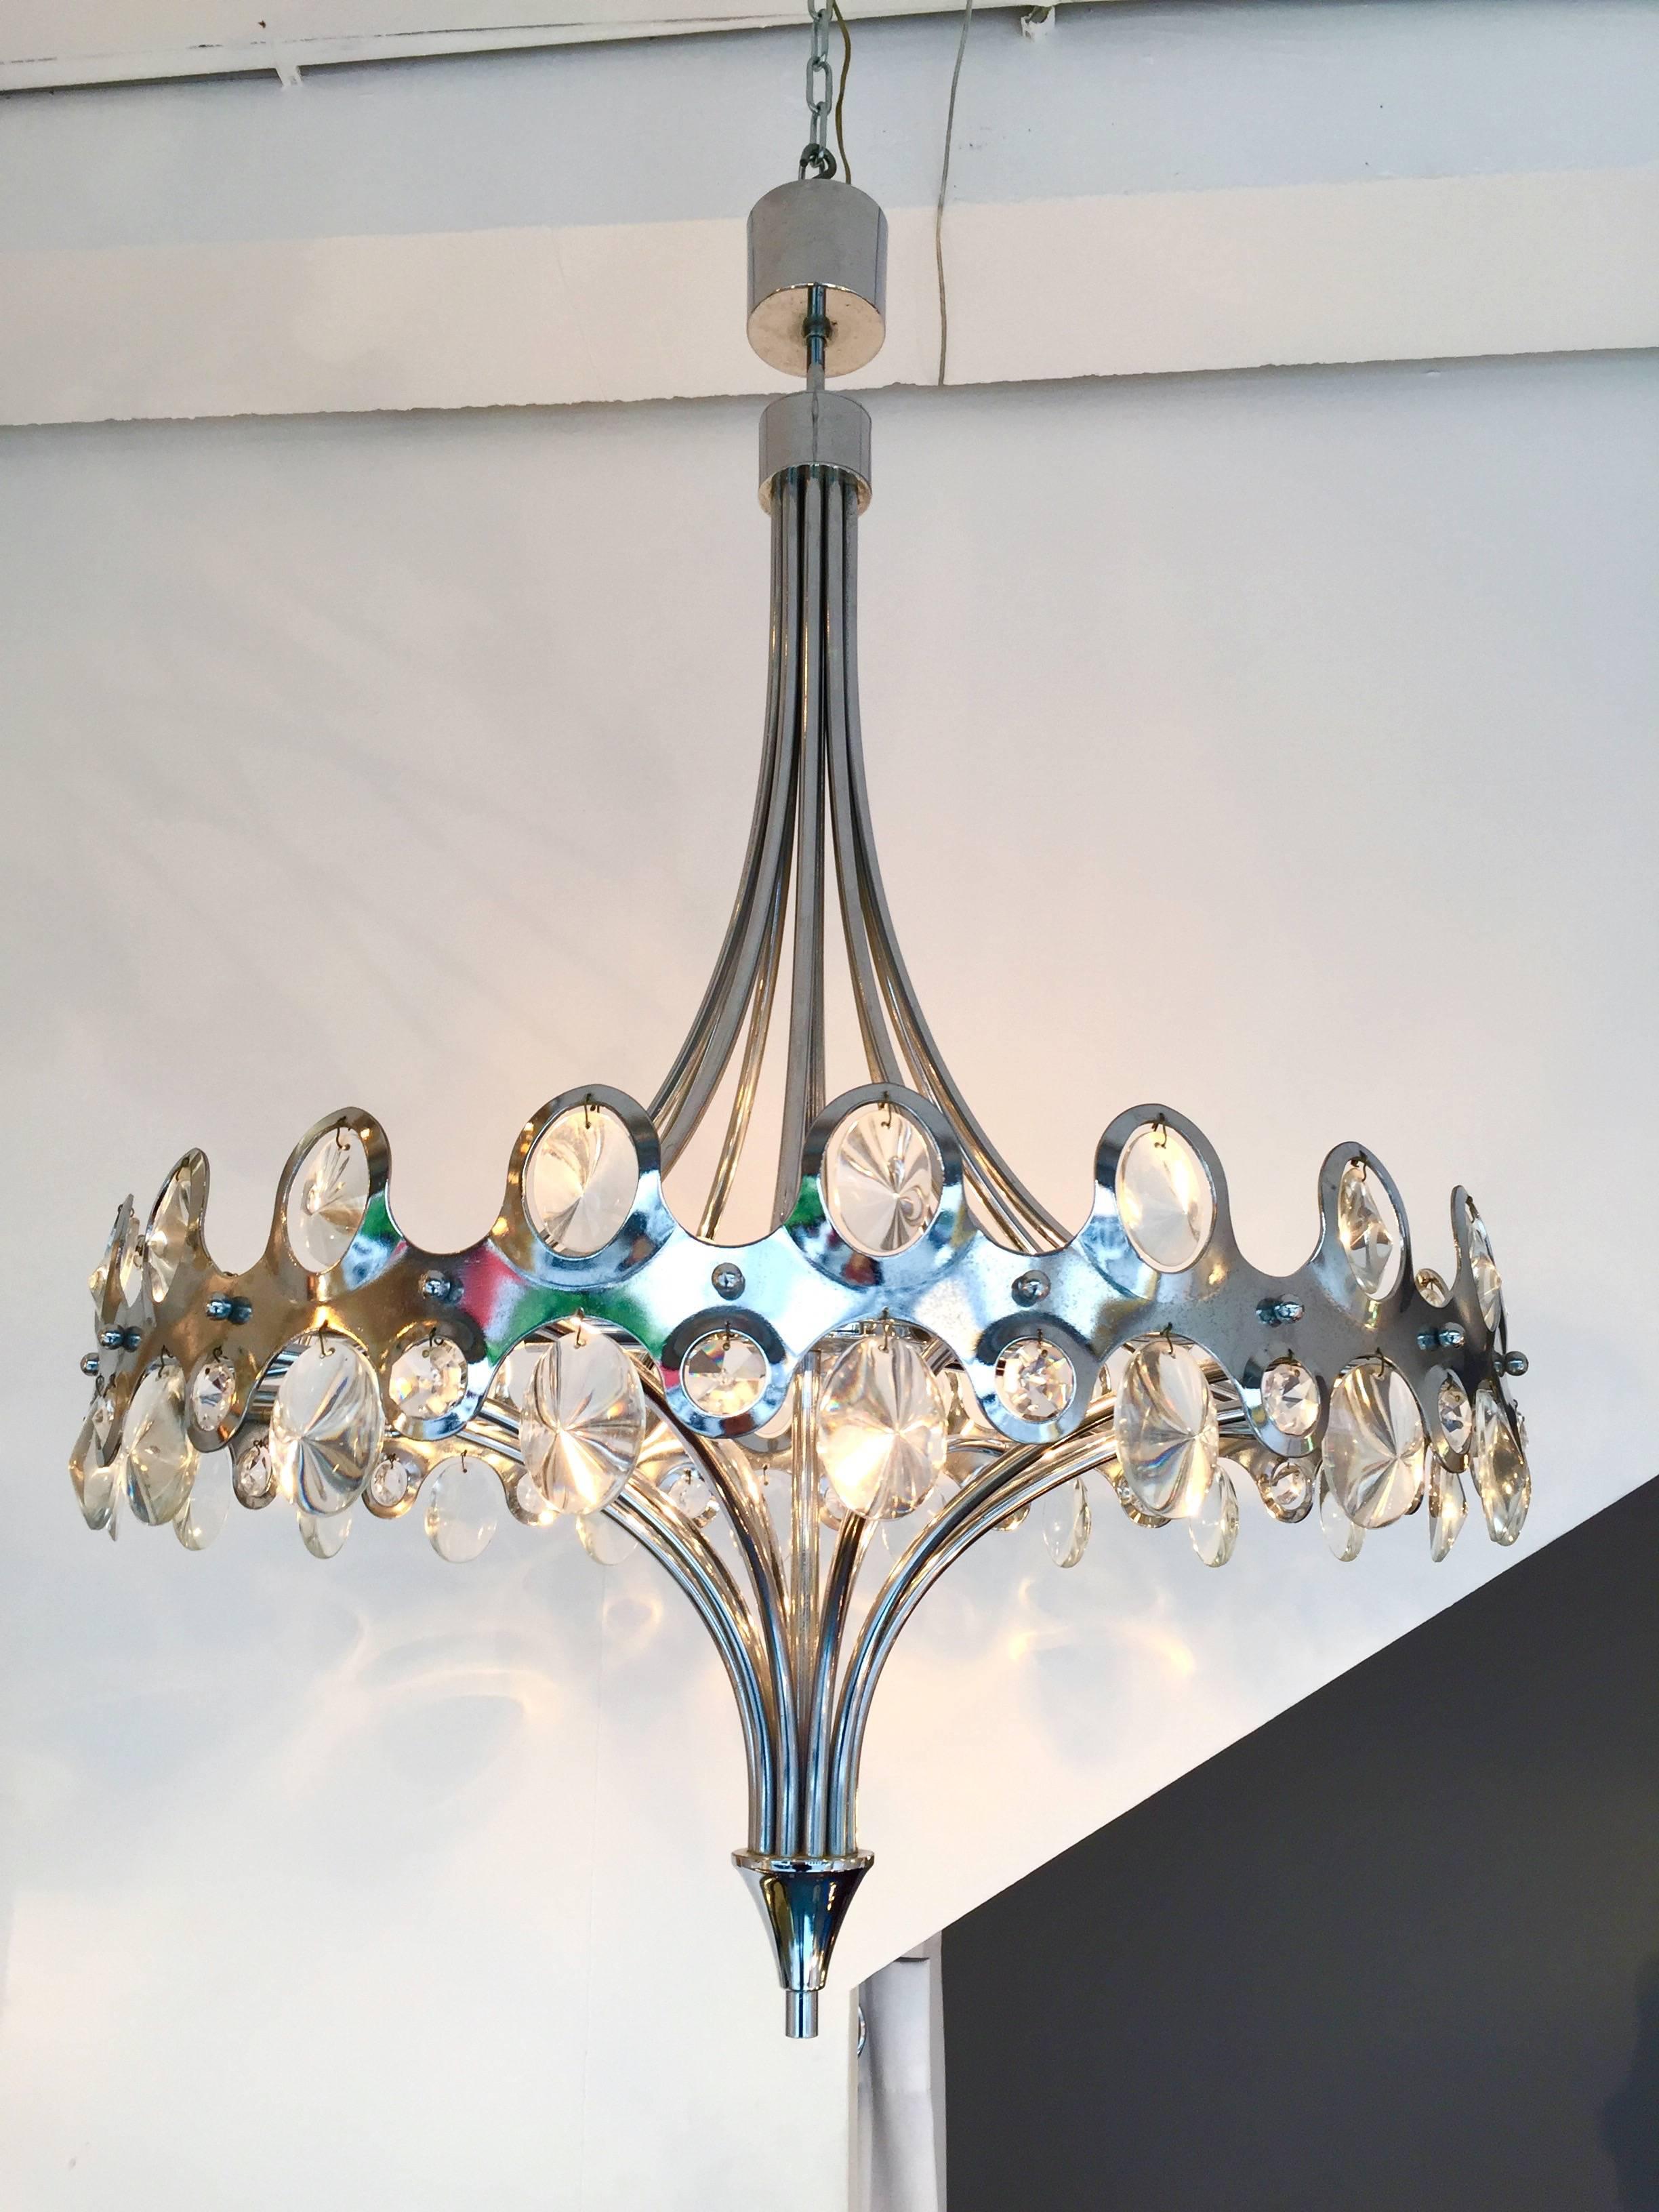 Mid-Century Modern crystal chandelier or ceiling pendant light by the designer Gaetano Sciolari. A touch of slight neoclassical style from Sciolari. Metal chrome and crystal glass. Perfect condition. Sciolari is a famous maker of the 1970s-1980s